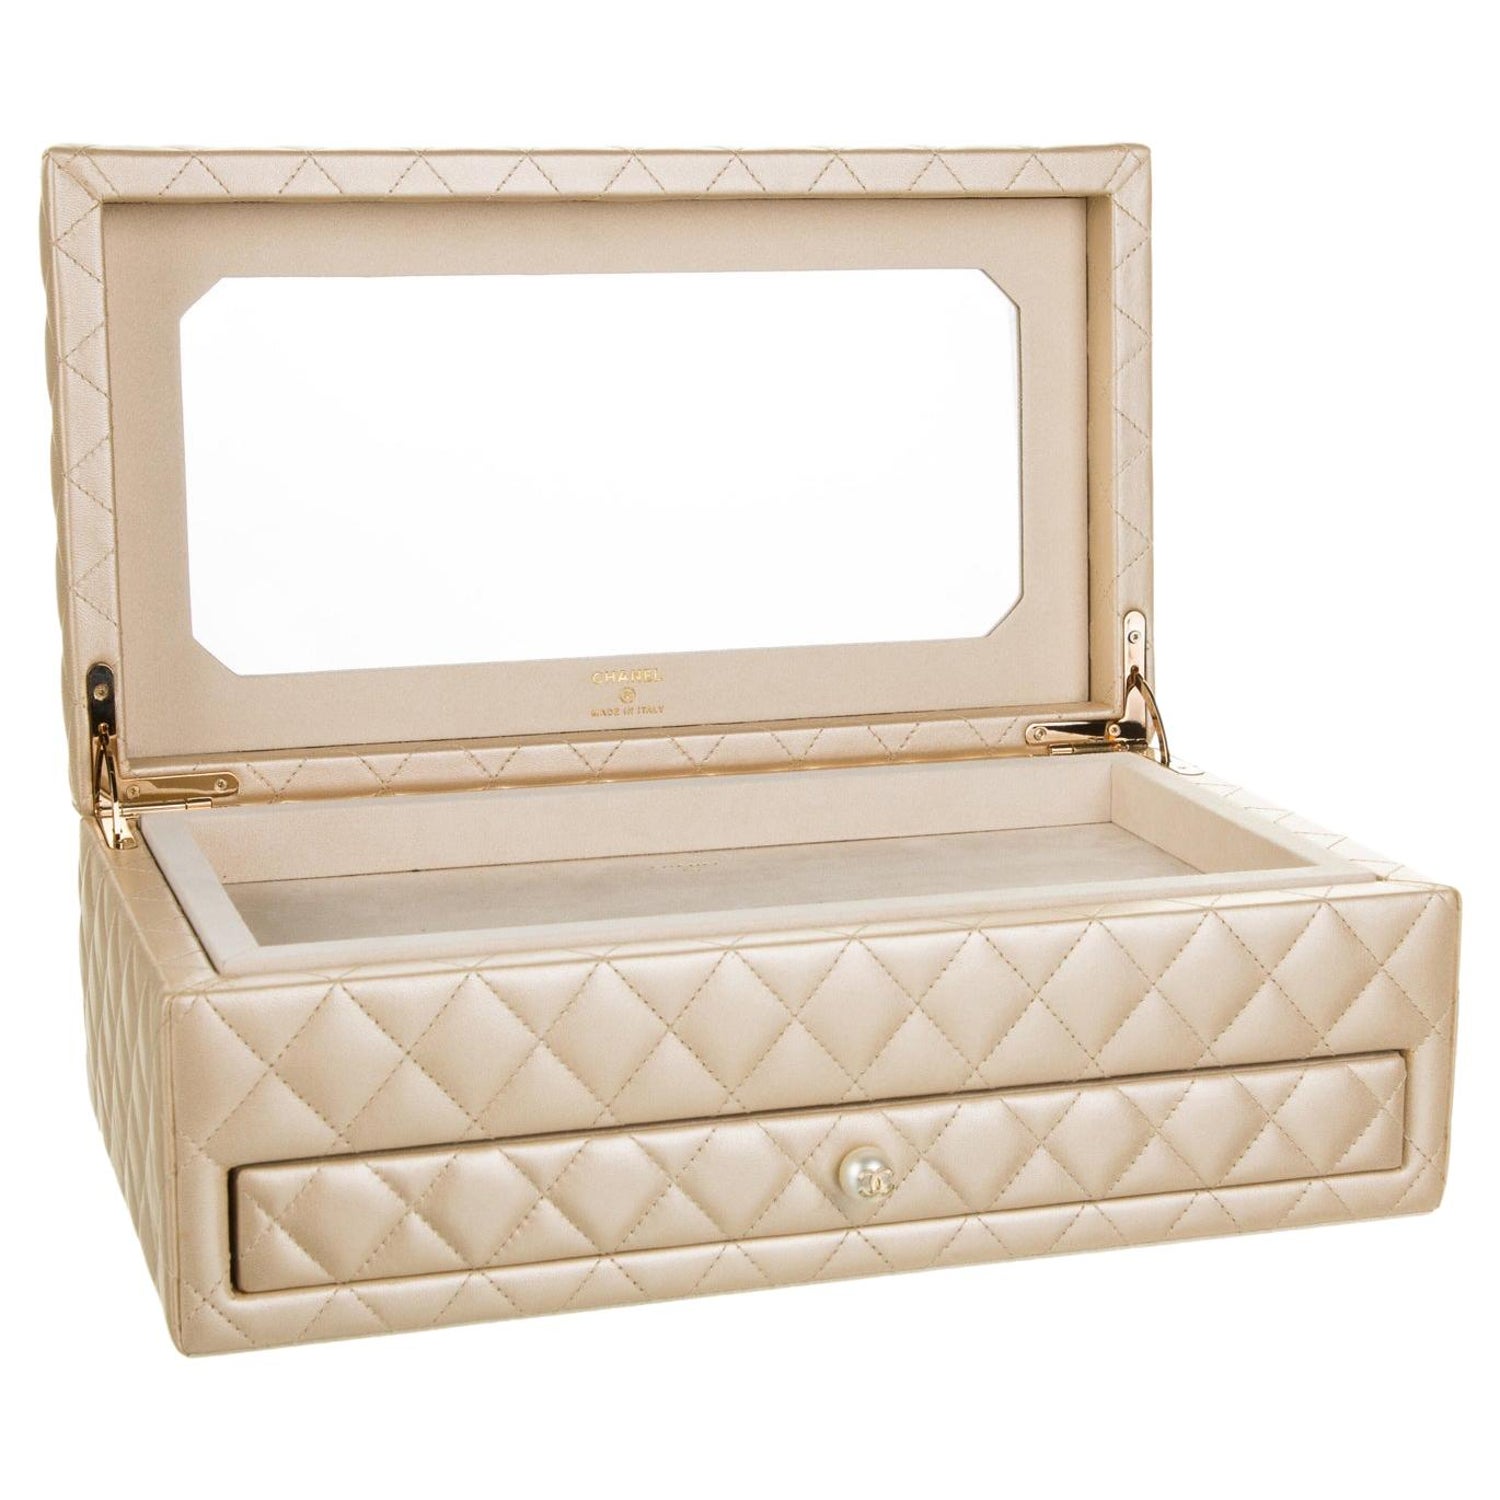 Vintage Chanel Jewelry Boxes - 10 For Sale at 1stDibs